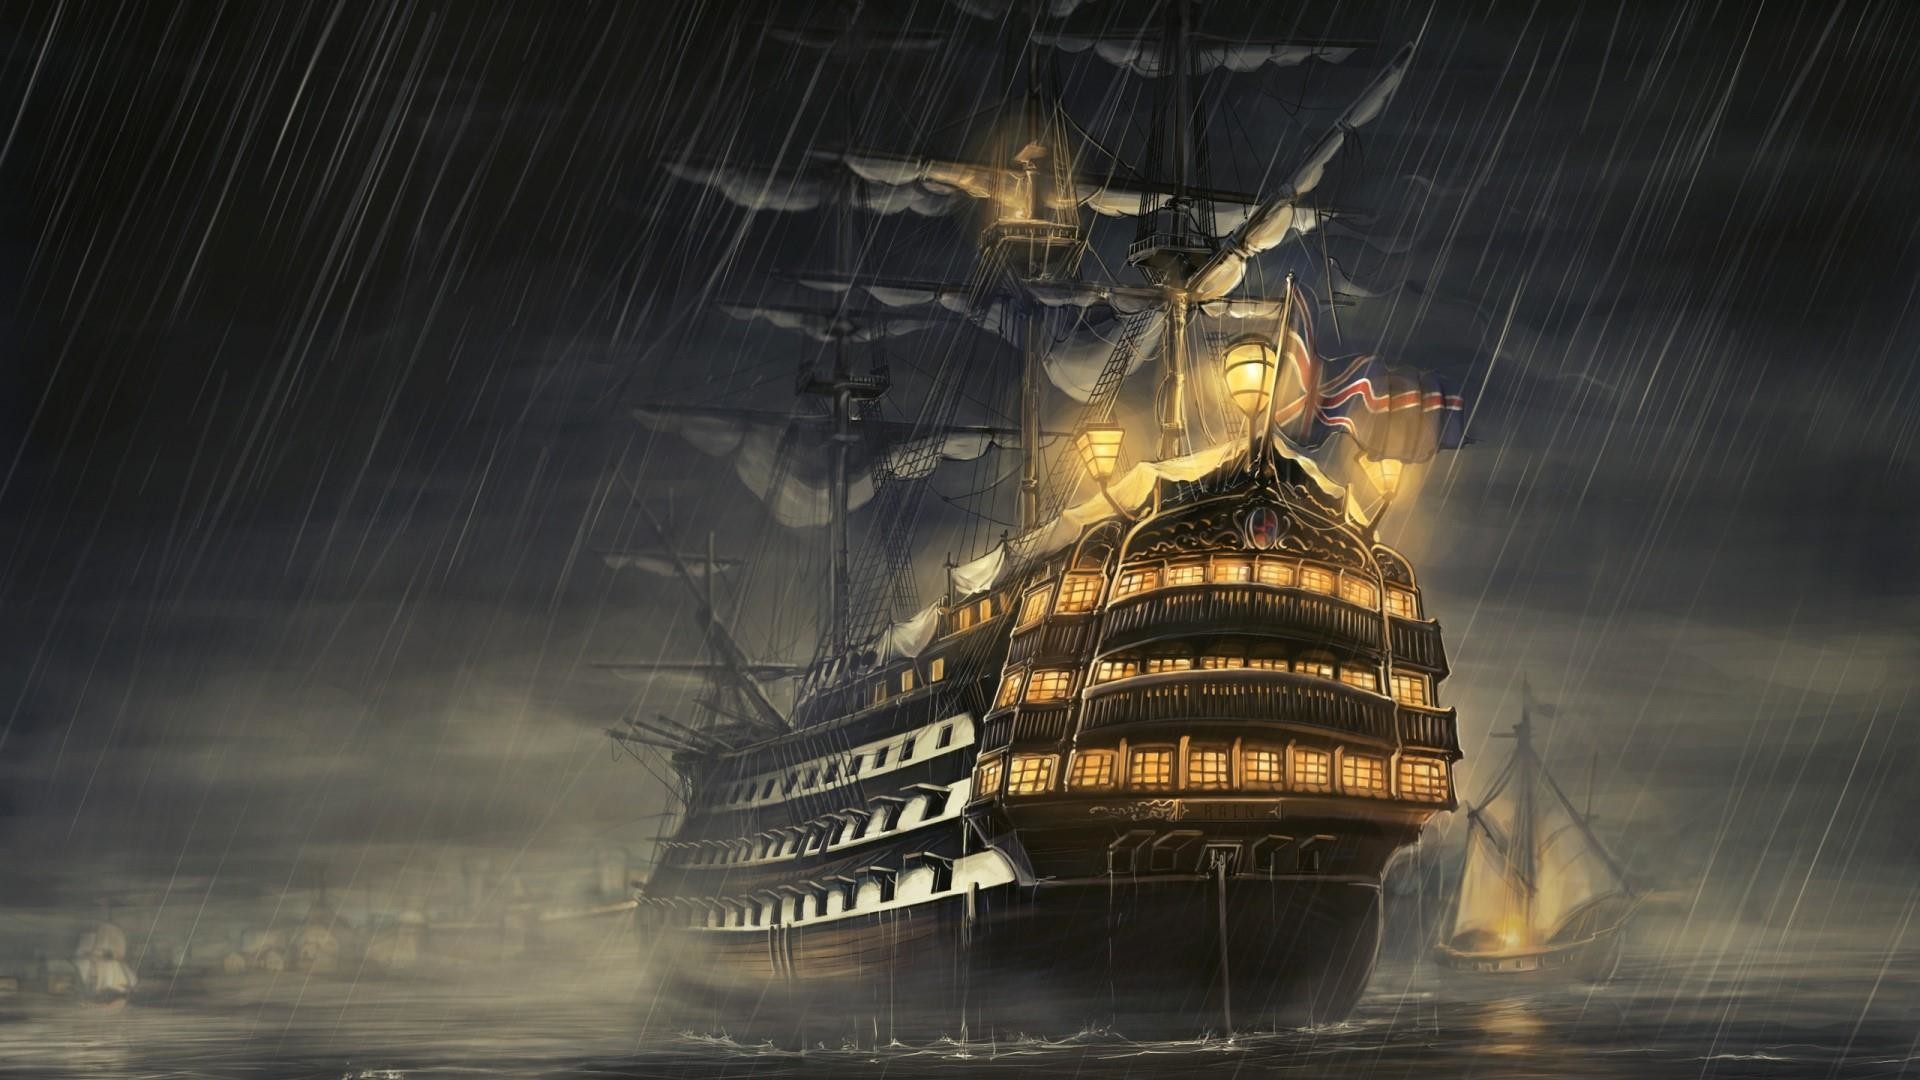 Pirate Ships Wallpaper 64 Images